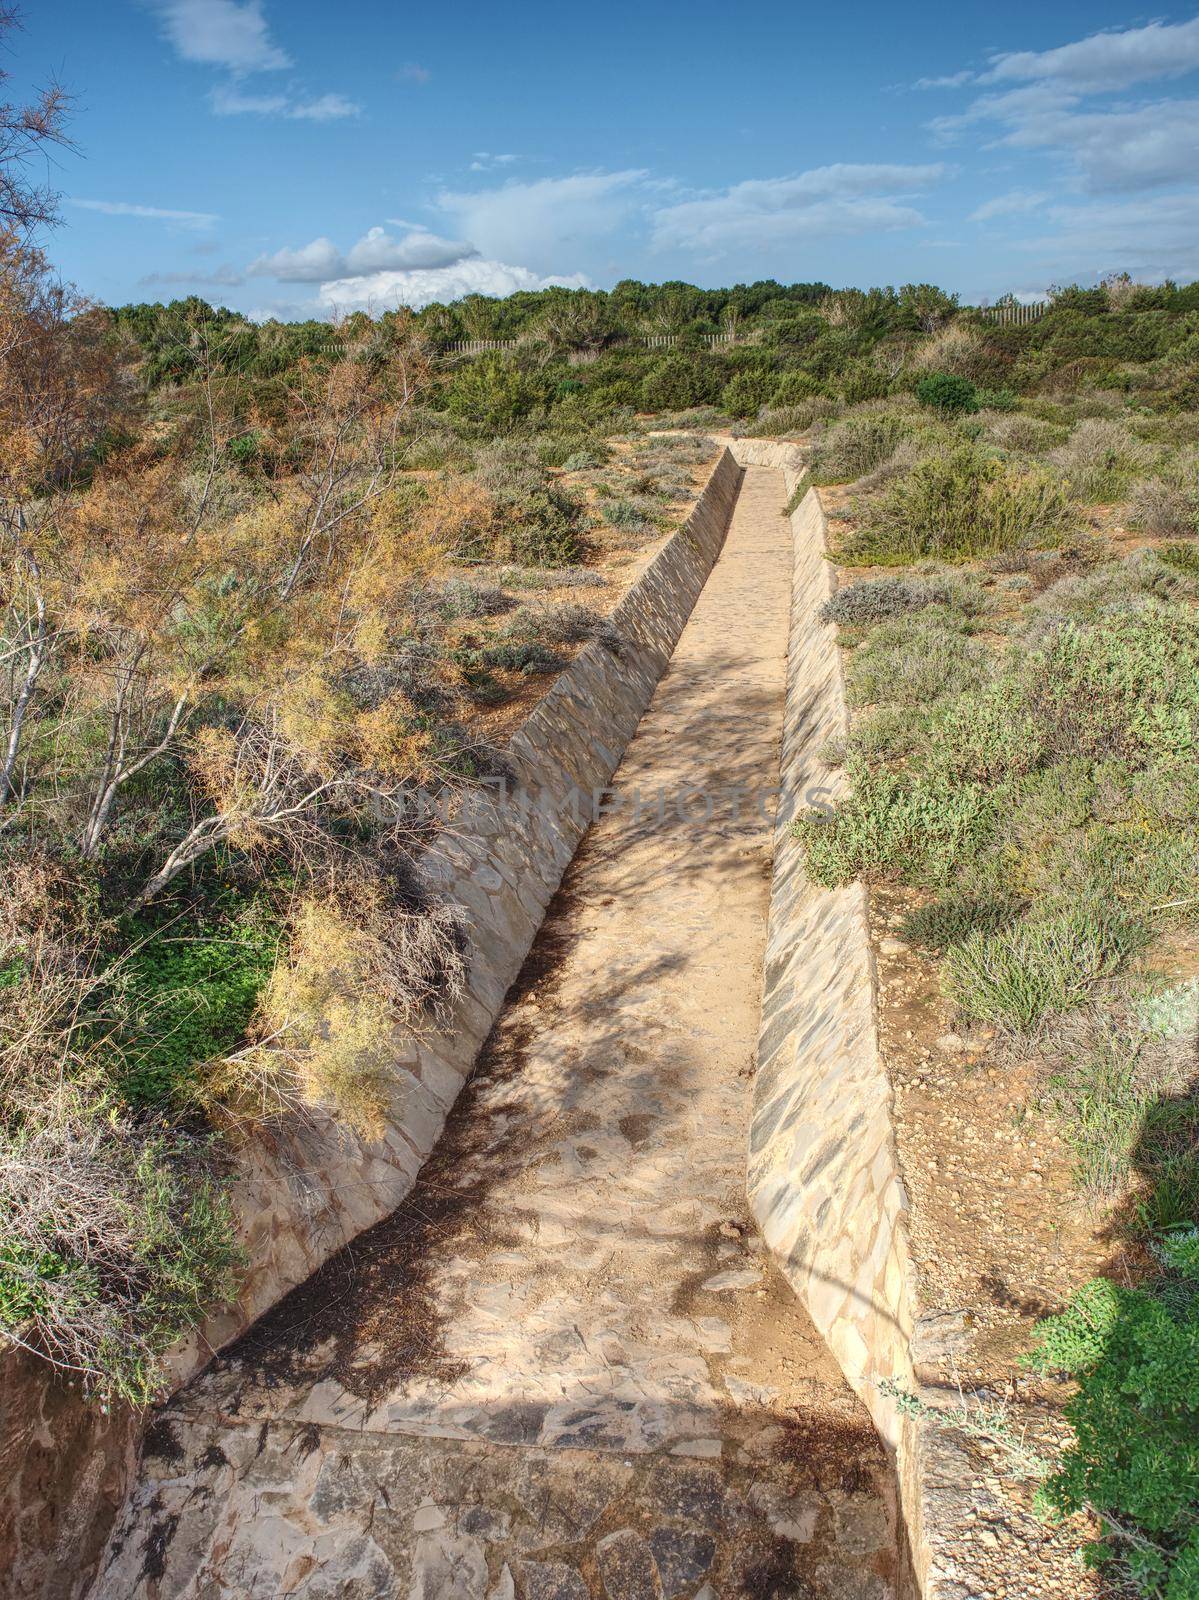 Close up of dry concrete drained channel, deep long lines. Empty channel, dry wild nature.